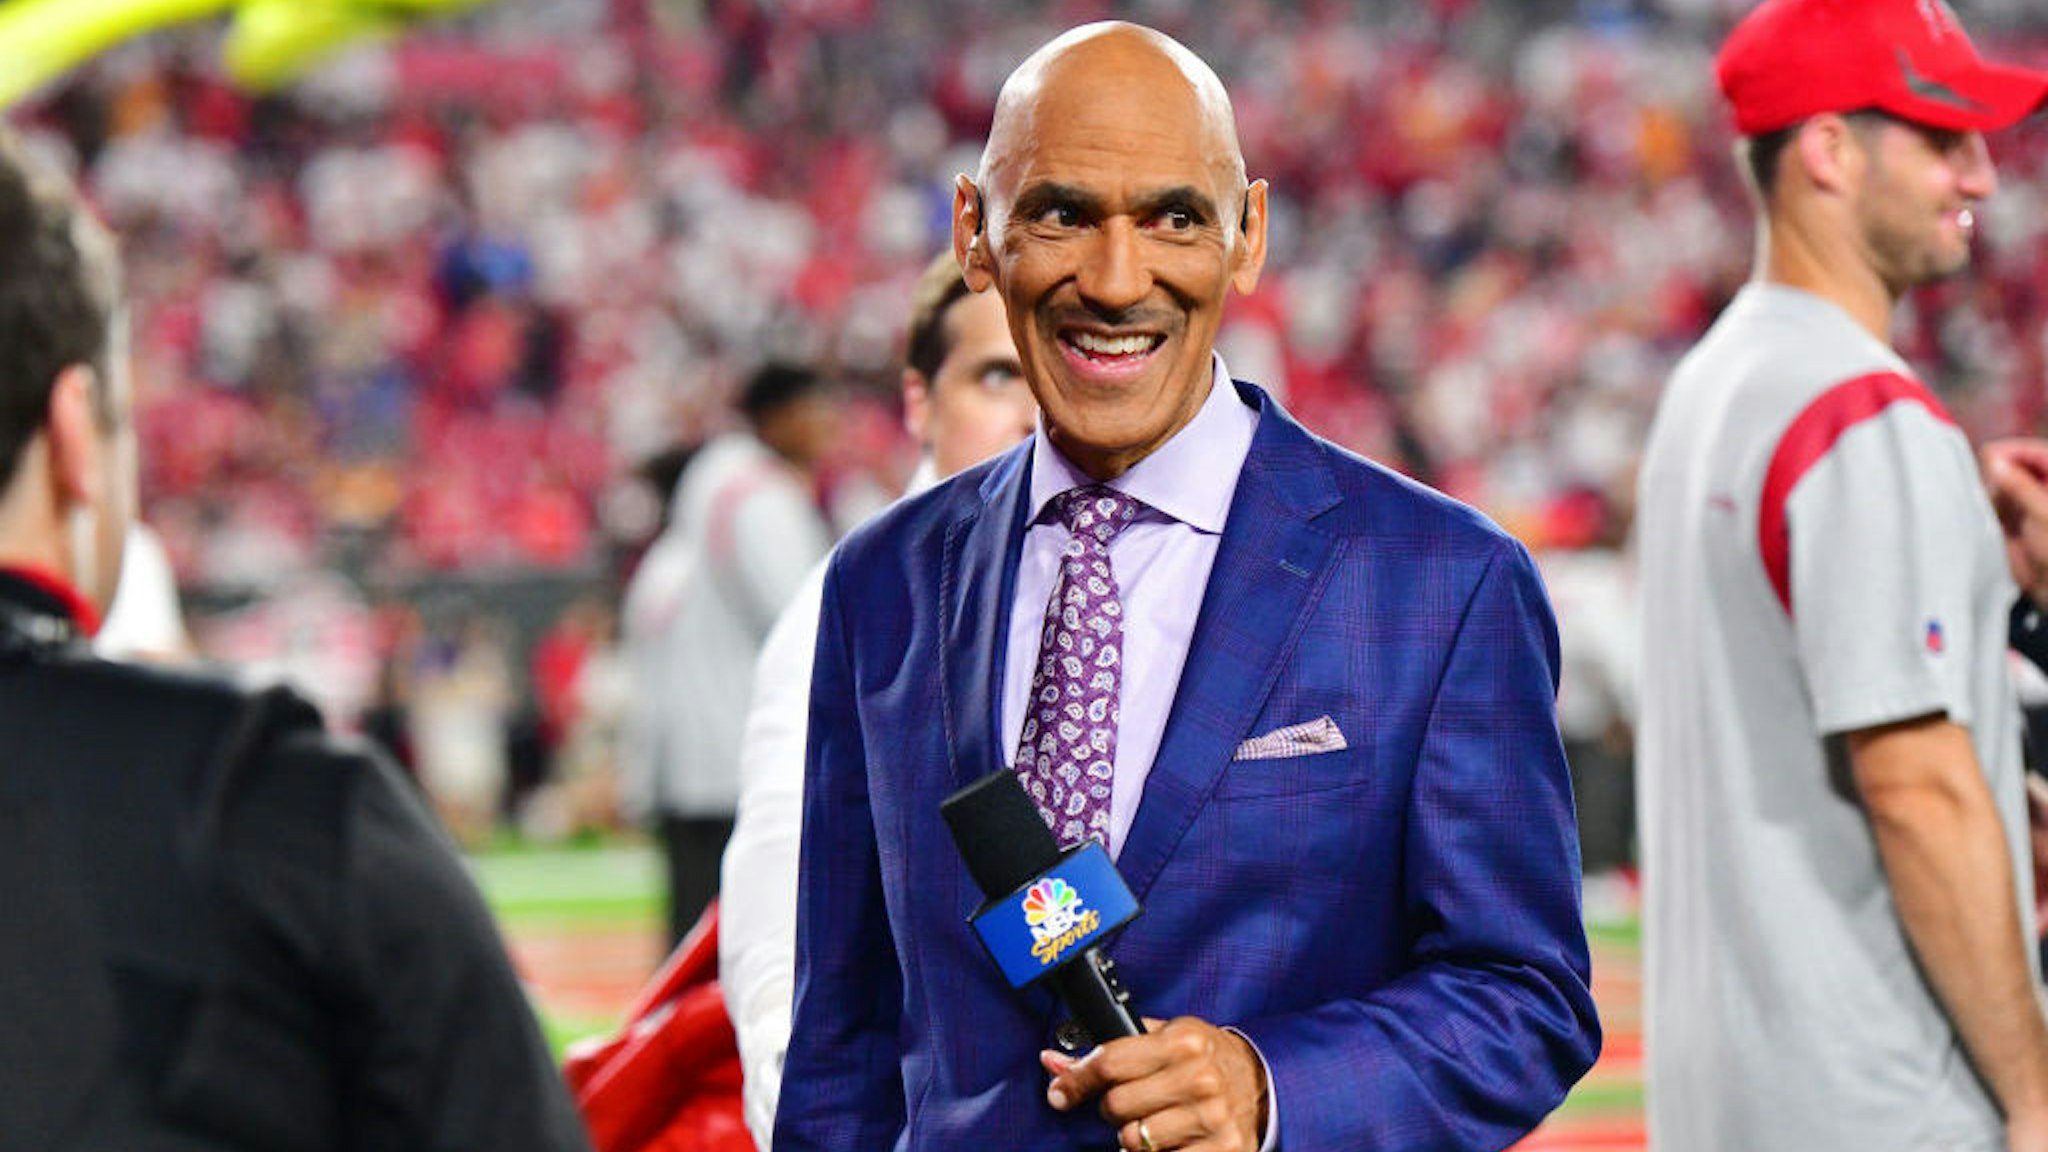 TAMPA, FLORIDA - SEPTEMBER 09: Tony Dungy looks on prior to a game between the Tampa Bay Buccaneers and the Dallas Cowboys at Raymond James Stadium on September 09, 2021 in Tampa, Florida. (Photo by Julio Aguilar/Getty Images)